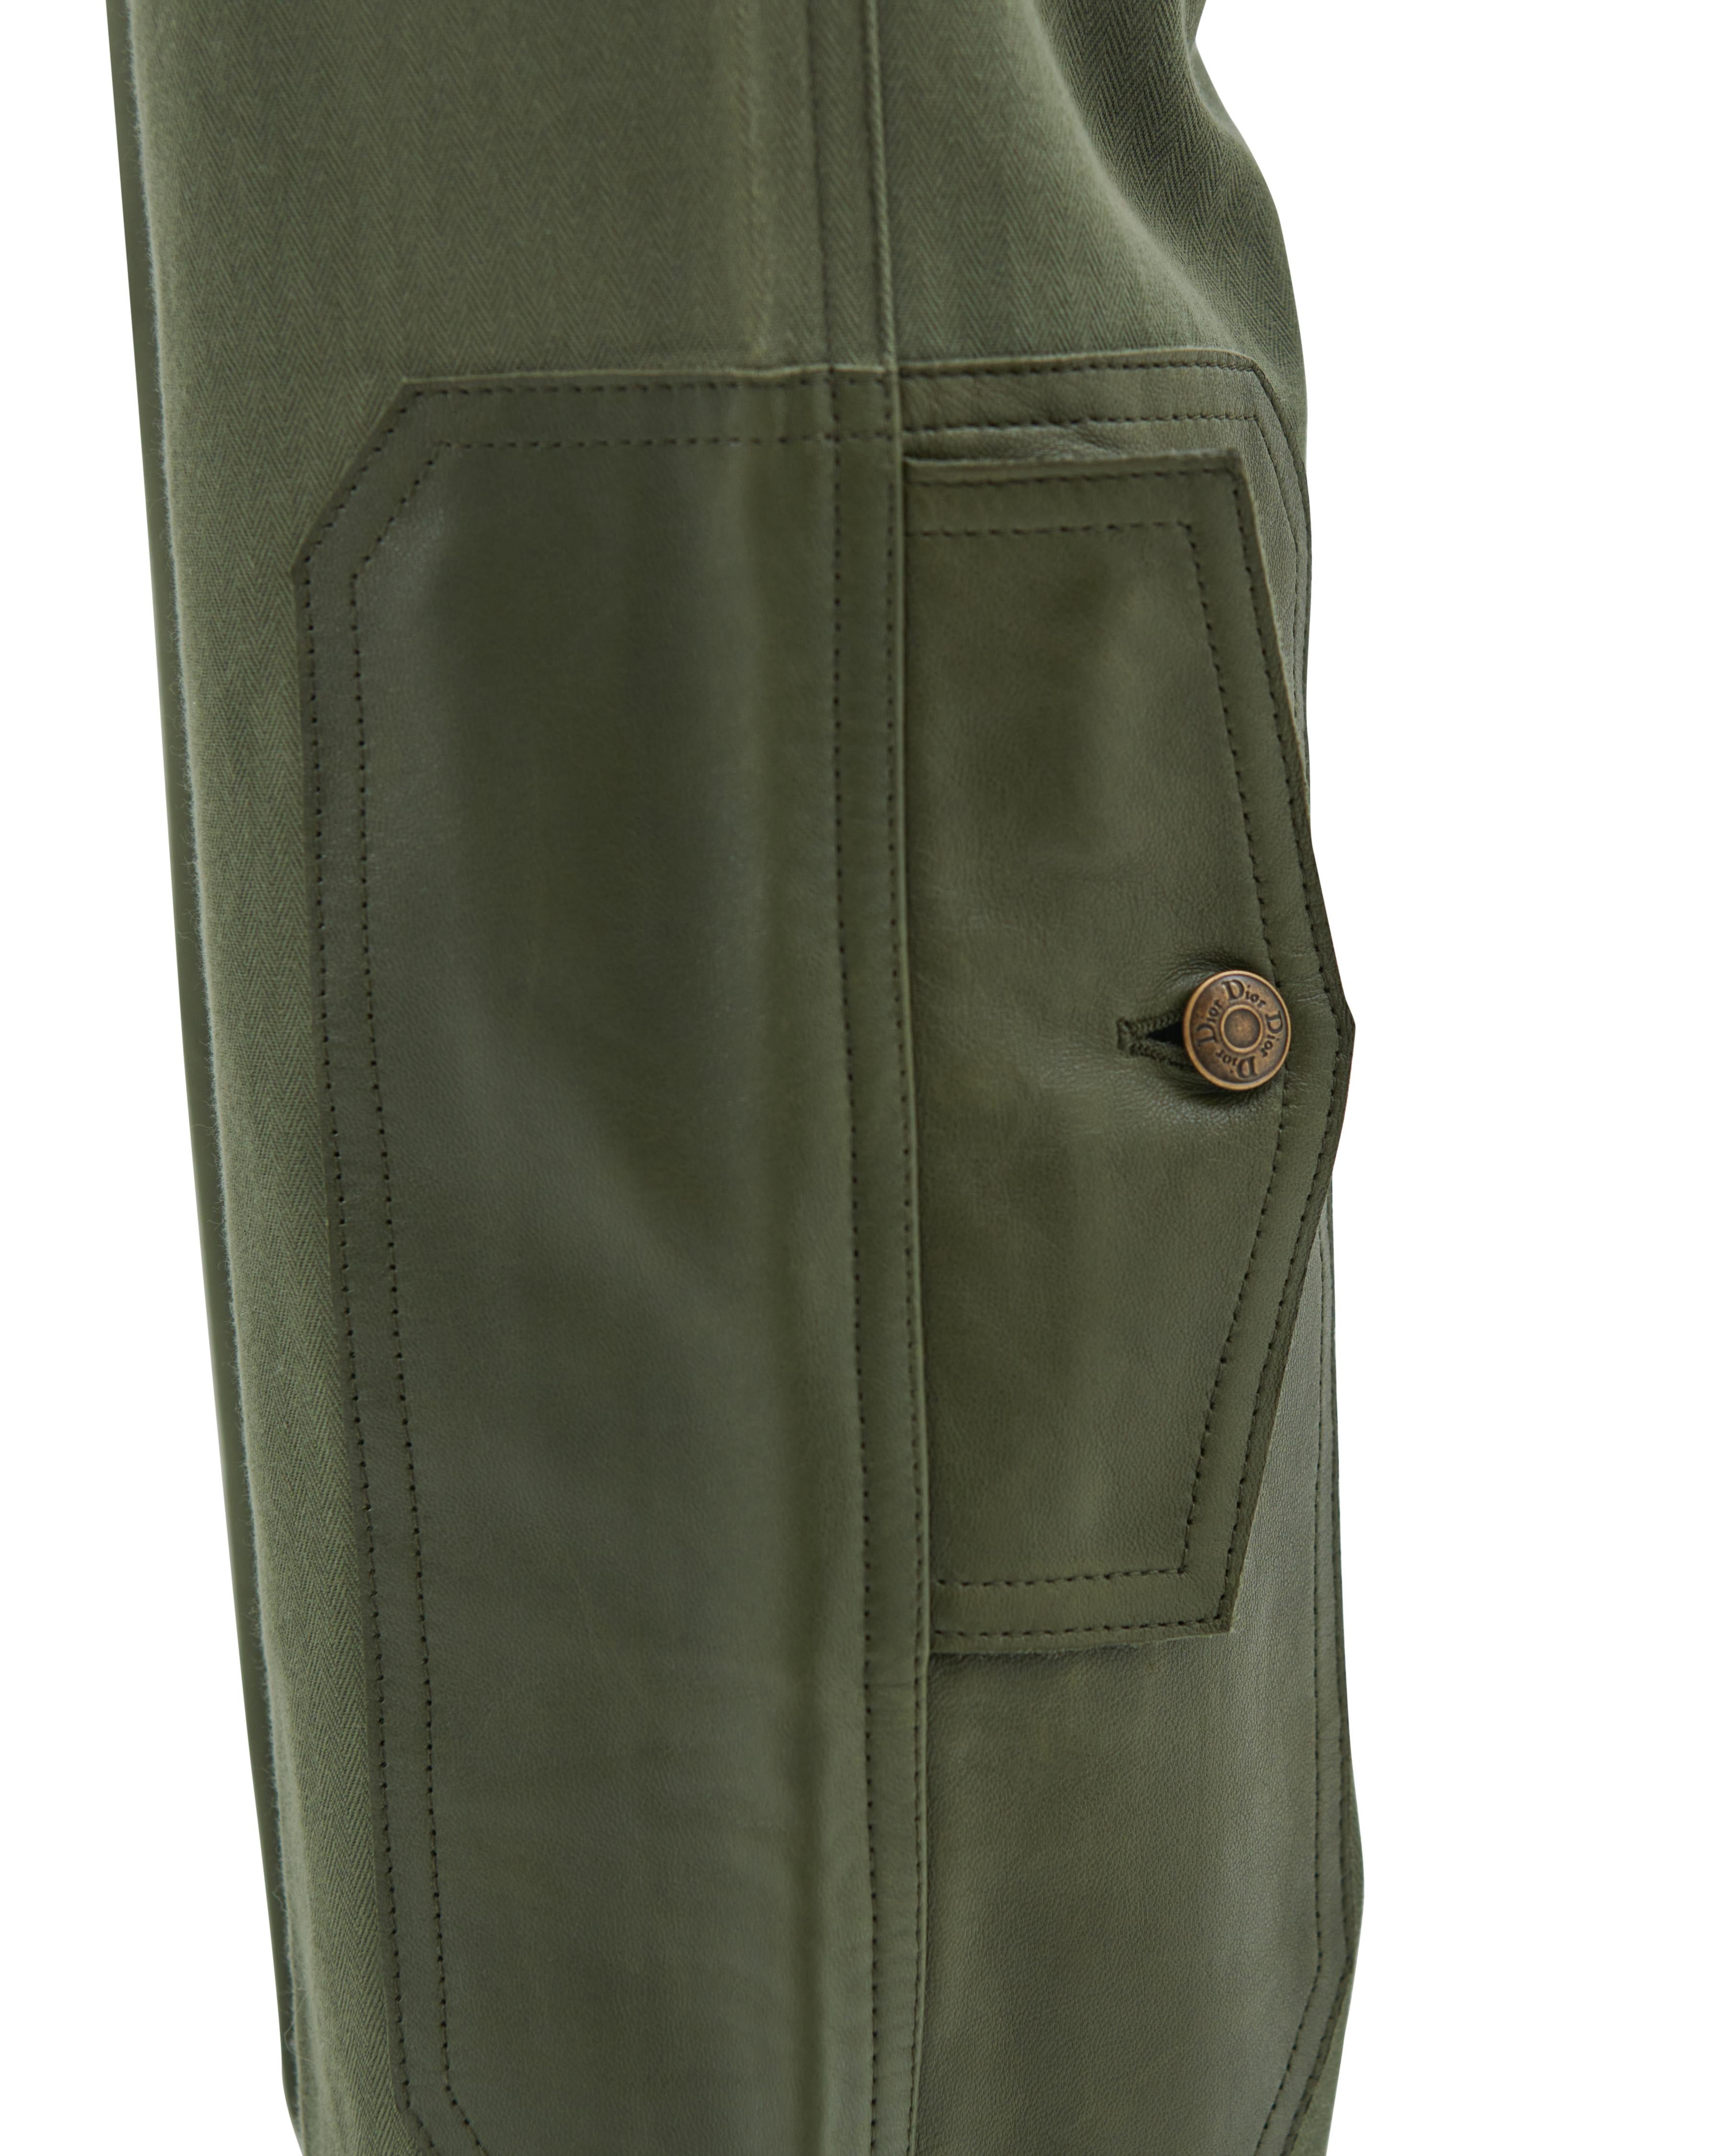 Christian Dior by John Galliano F/W 2003 Khaki cotton canvas and leather cargo p For Sale 5